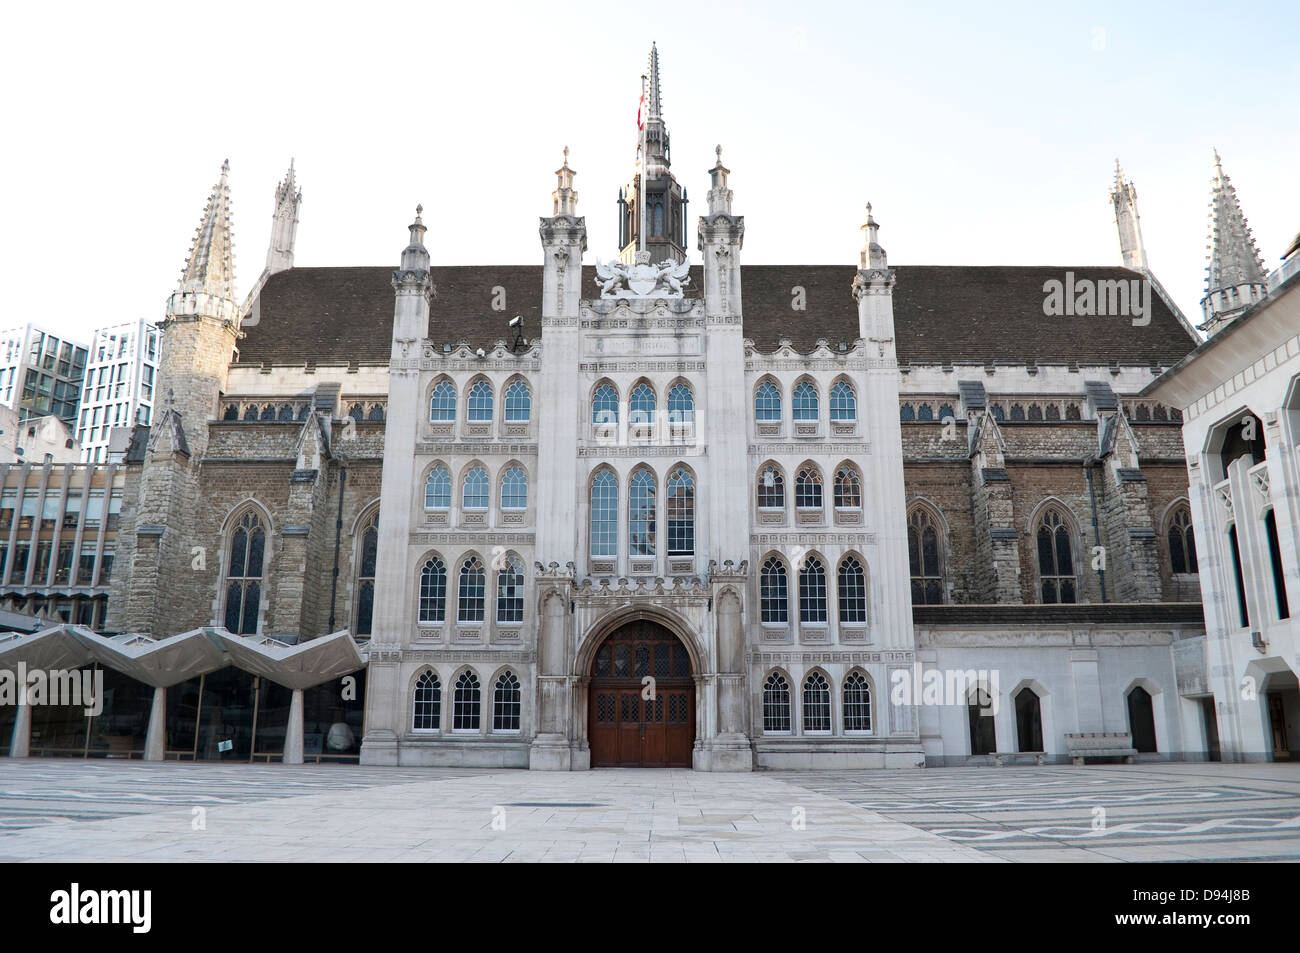 Guildhall Art Gallery, City of London, EC2, UK Banque D'Images